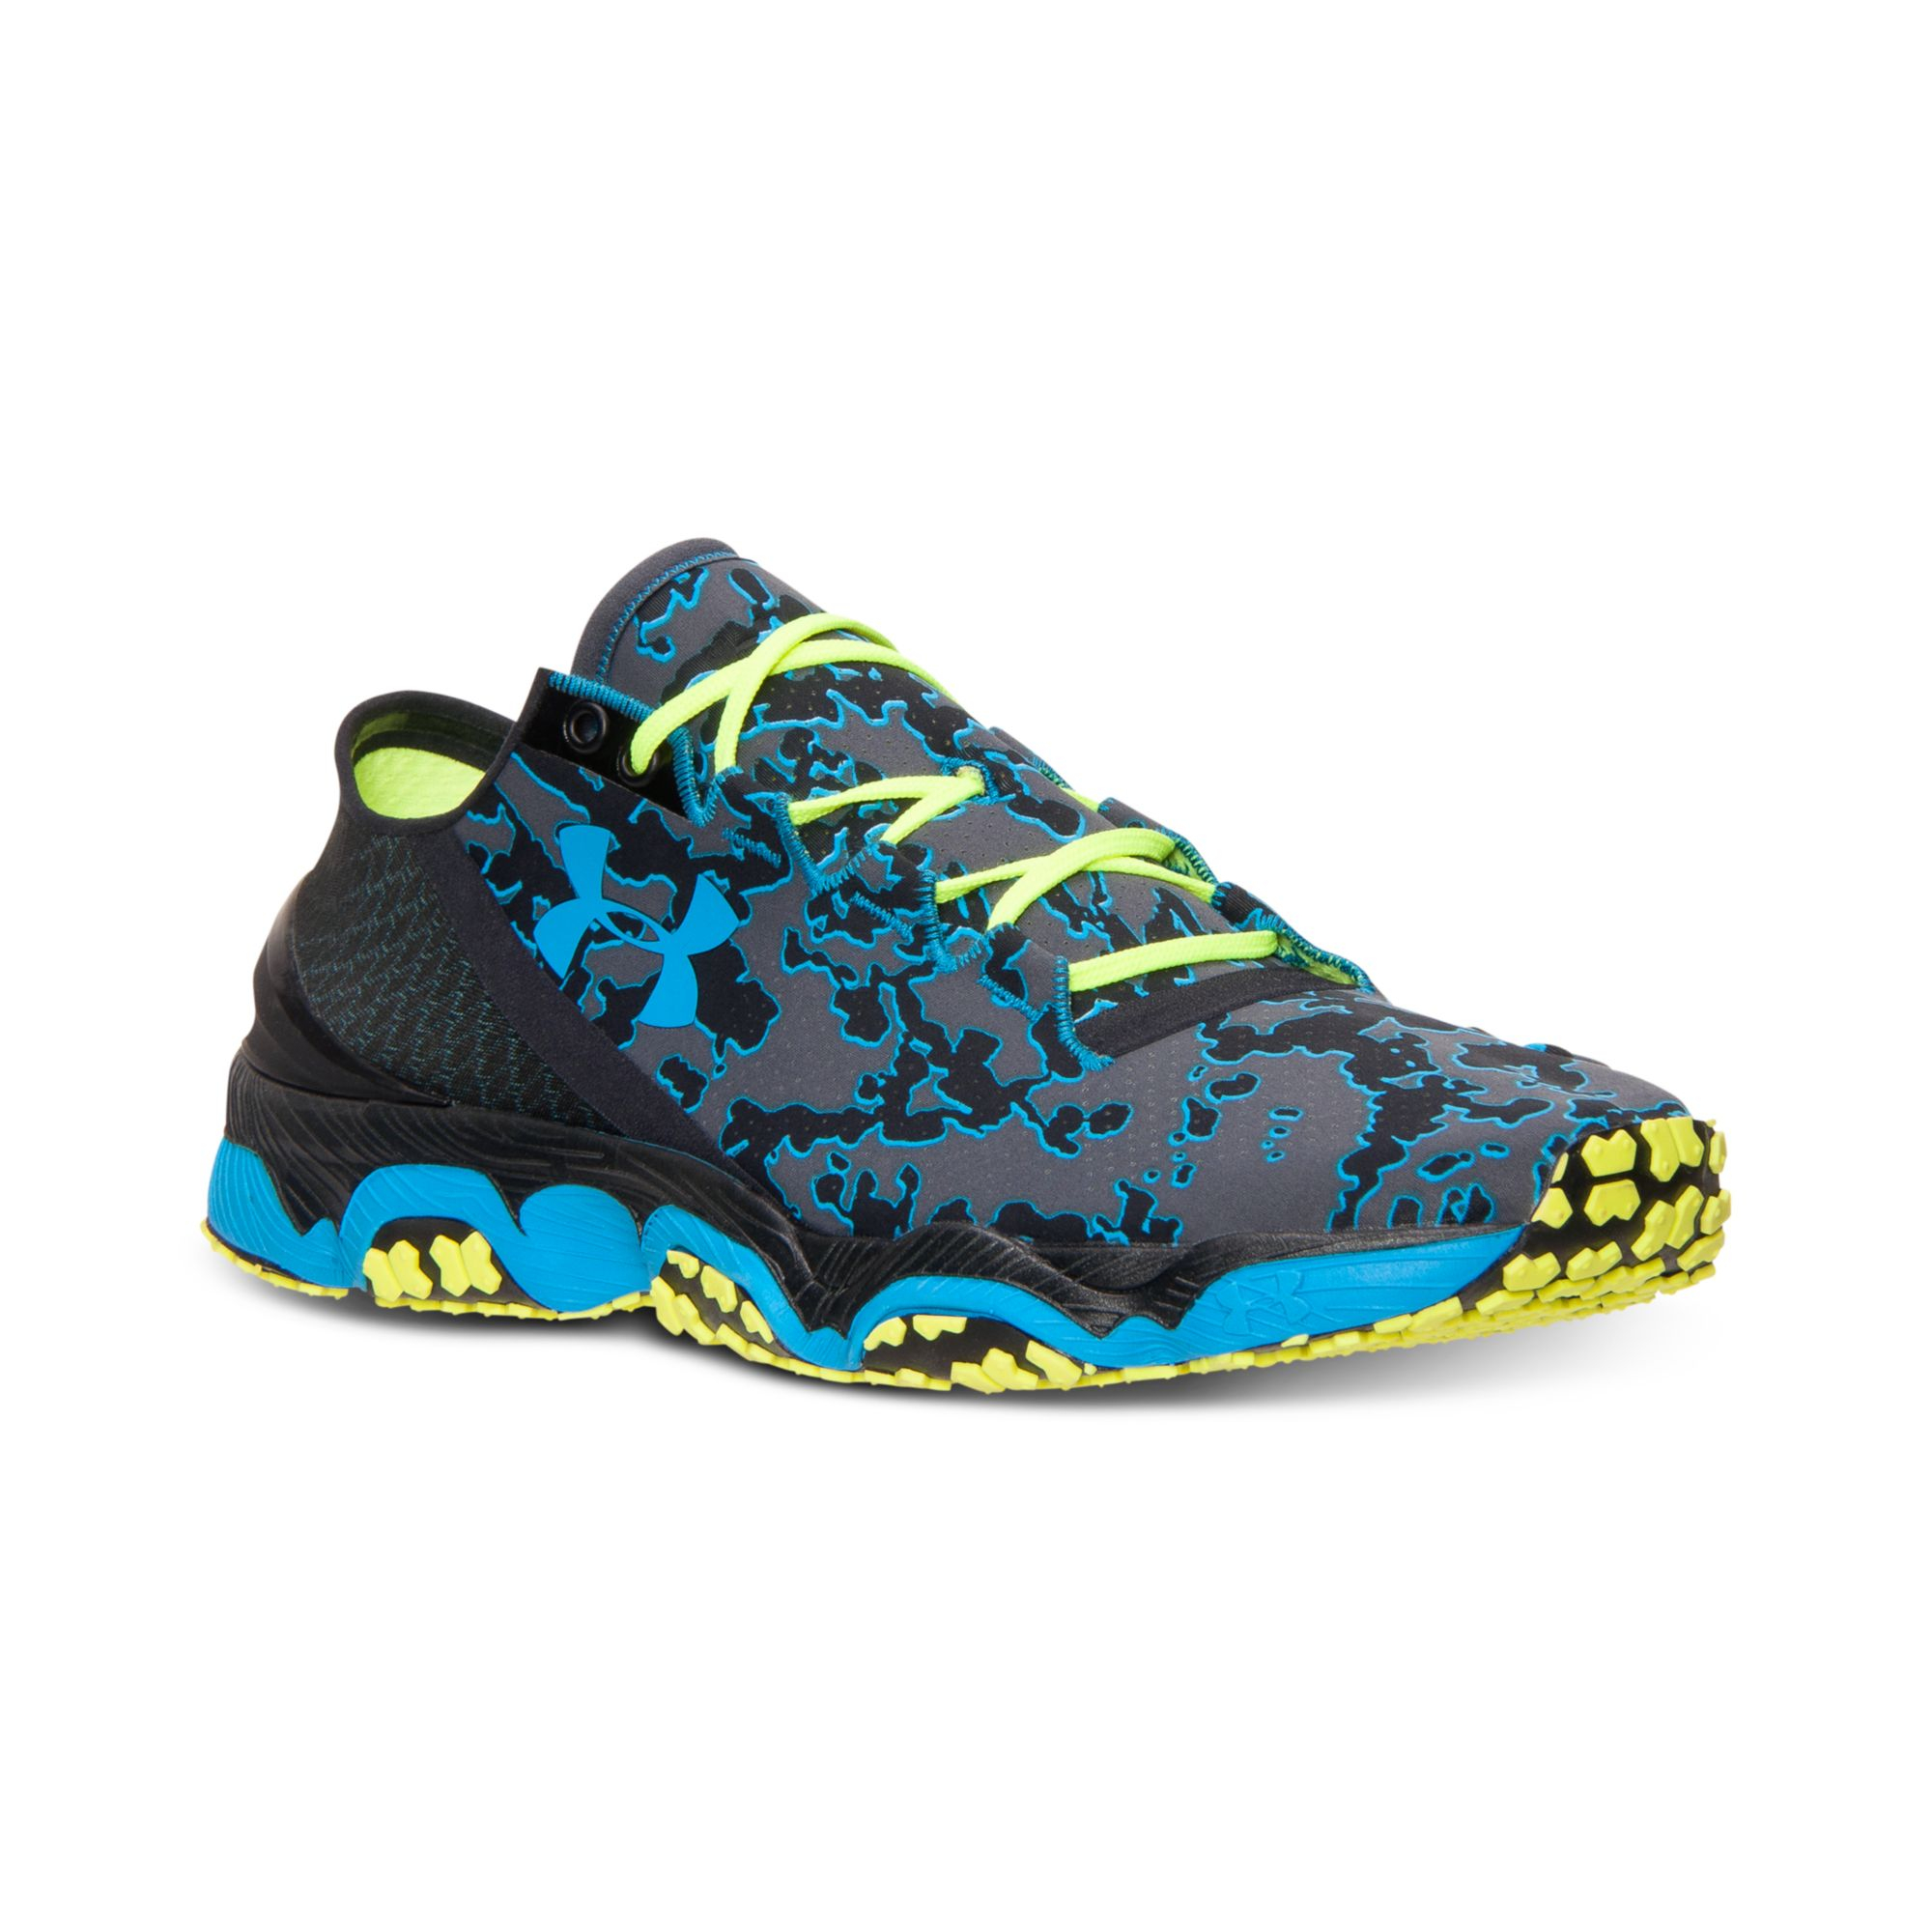 Under Armour Mens Speedform Xc Trail Running Sneakers From Finish Line